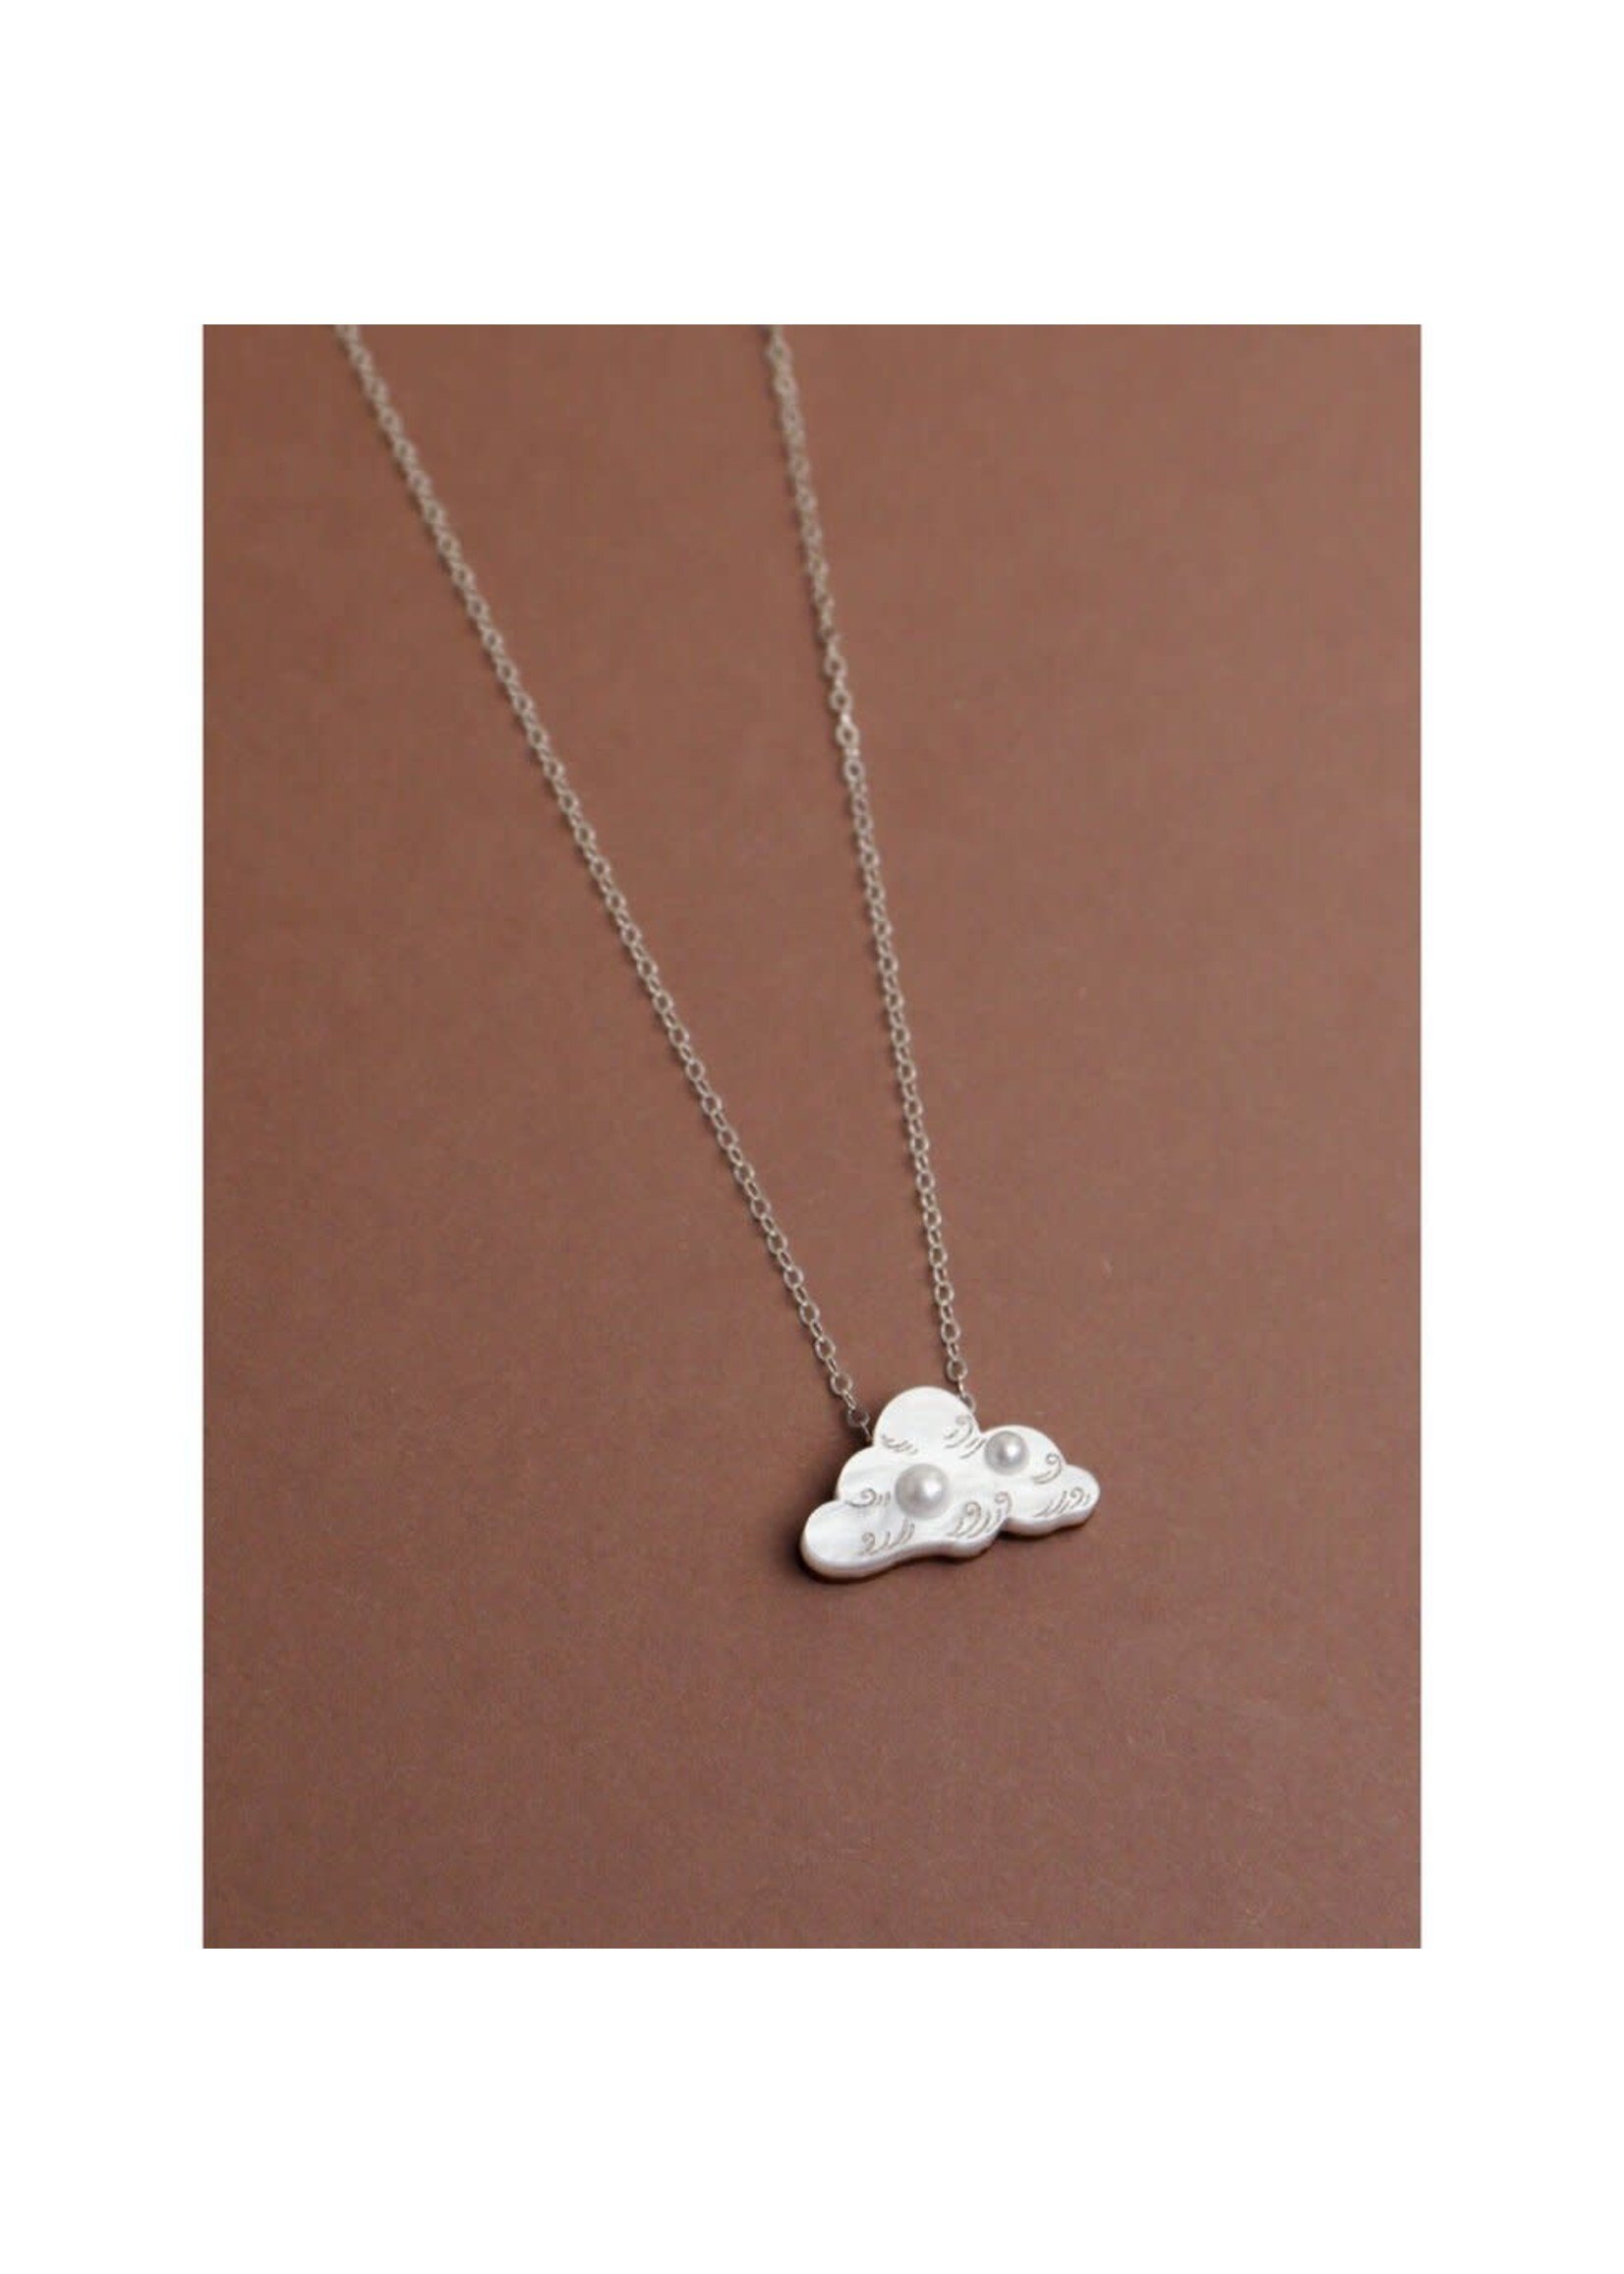 Wolf & Moon Wolf & Moon Cloud Necklace - Silver